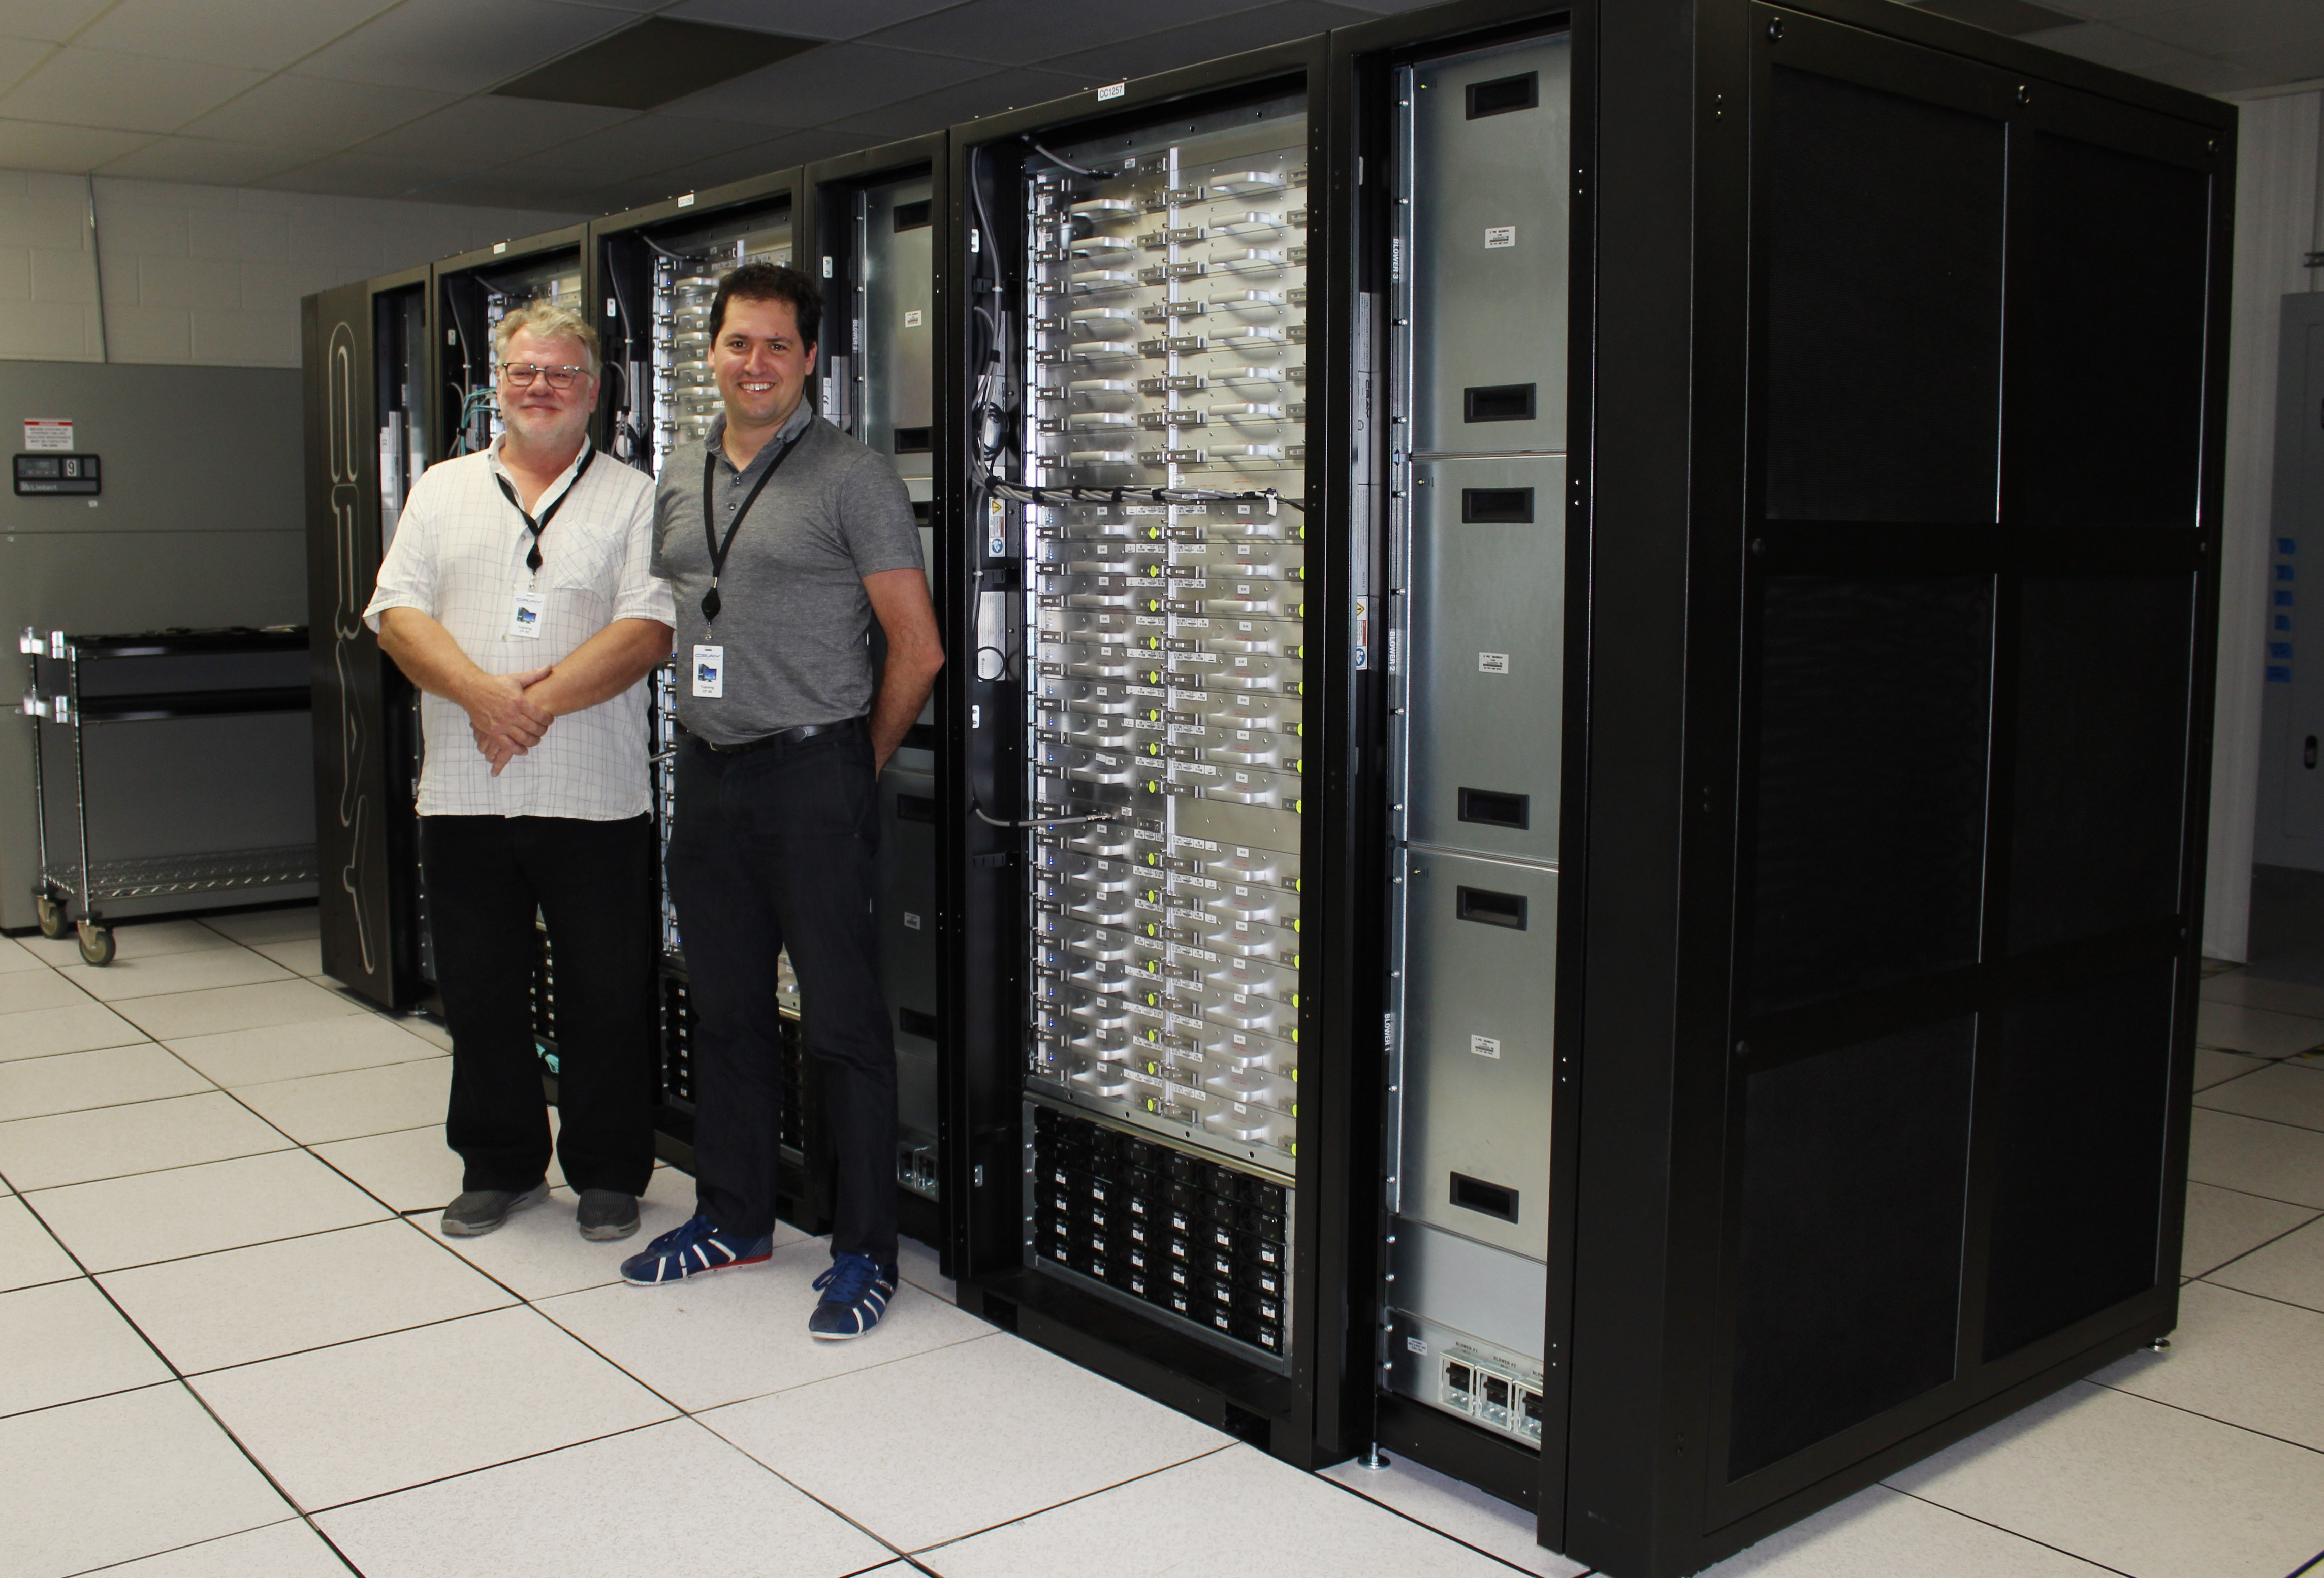 NeSI's Fabrice Cantos and Greg Hall at the Cray factory checking in on our XC50